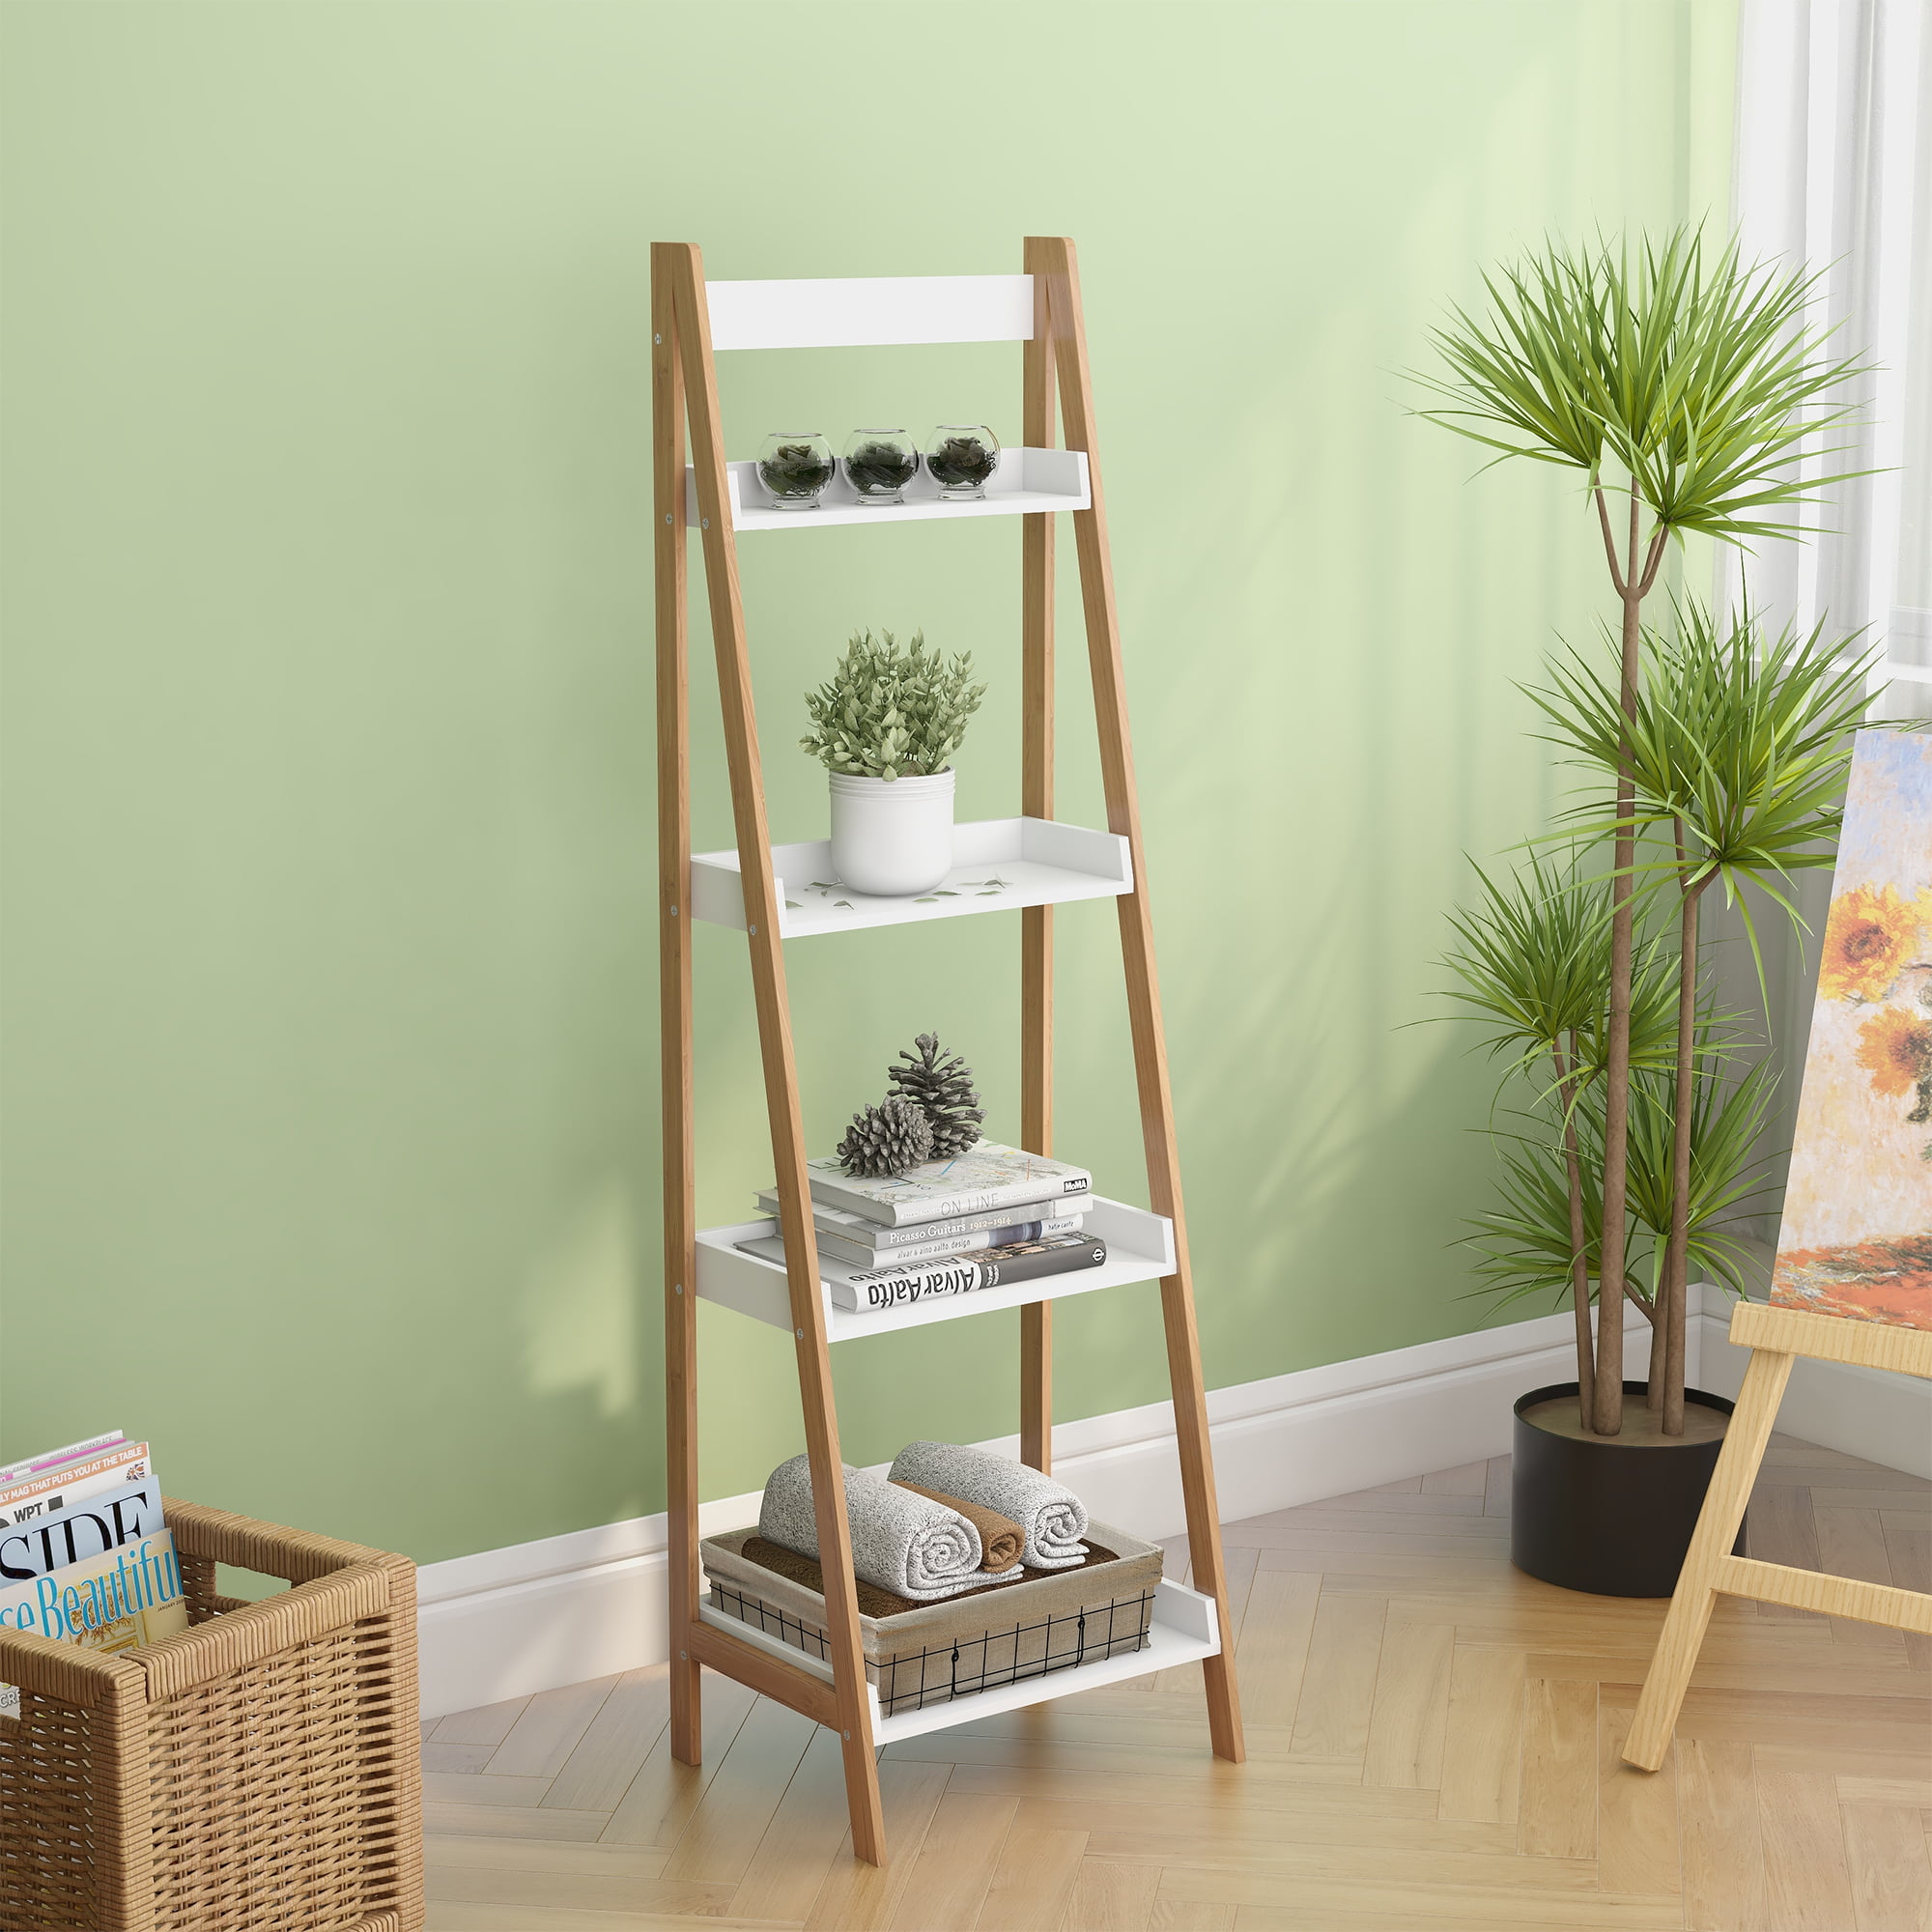 Details about   3-Tier Ladder Shelf Bookshelf Wall Plant Display Stand Storage Leaning 